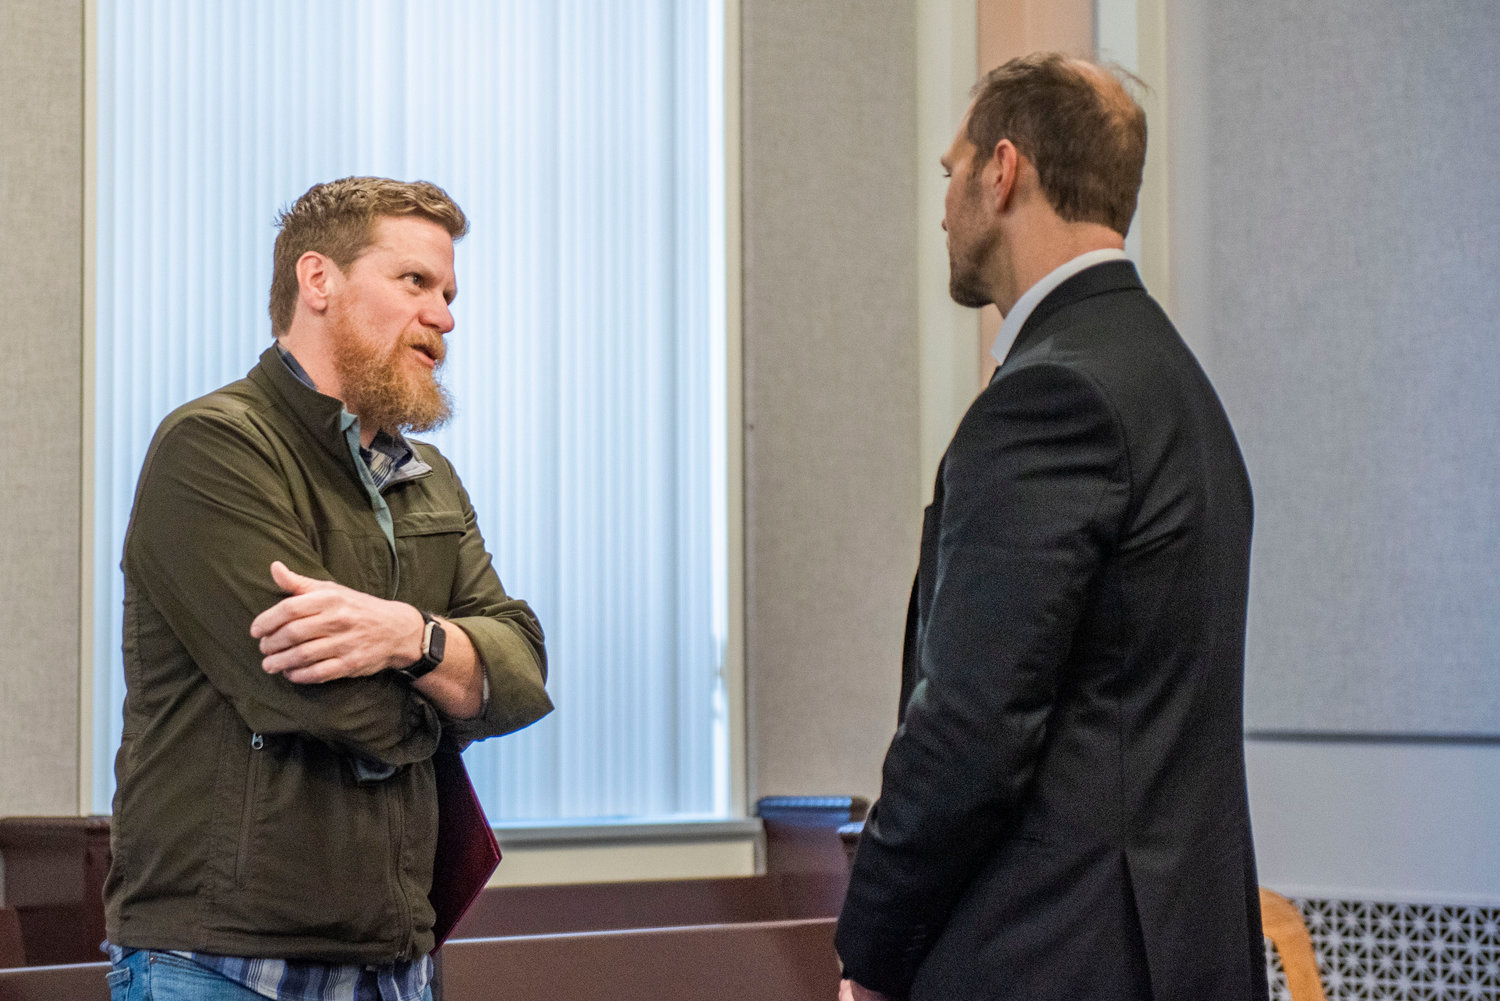 Commissioner Sean Swope approaches and listens to Cole Meckle, pastor at Gather Church in Centralia — which has run the county’s coordinated entry program among other services for homelessness — ahead of Tuesday morning meetings in the Lewis County Commissioners’ Hearing room in Chehalis.